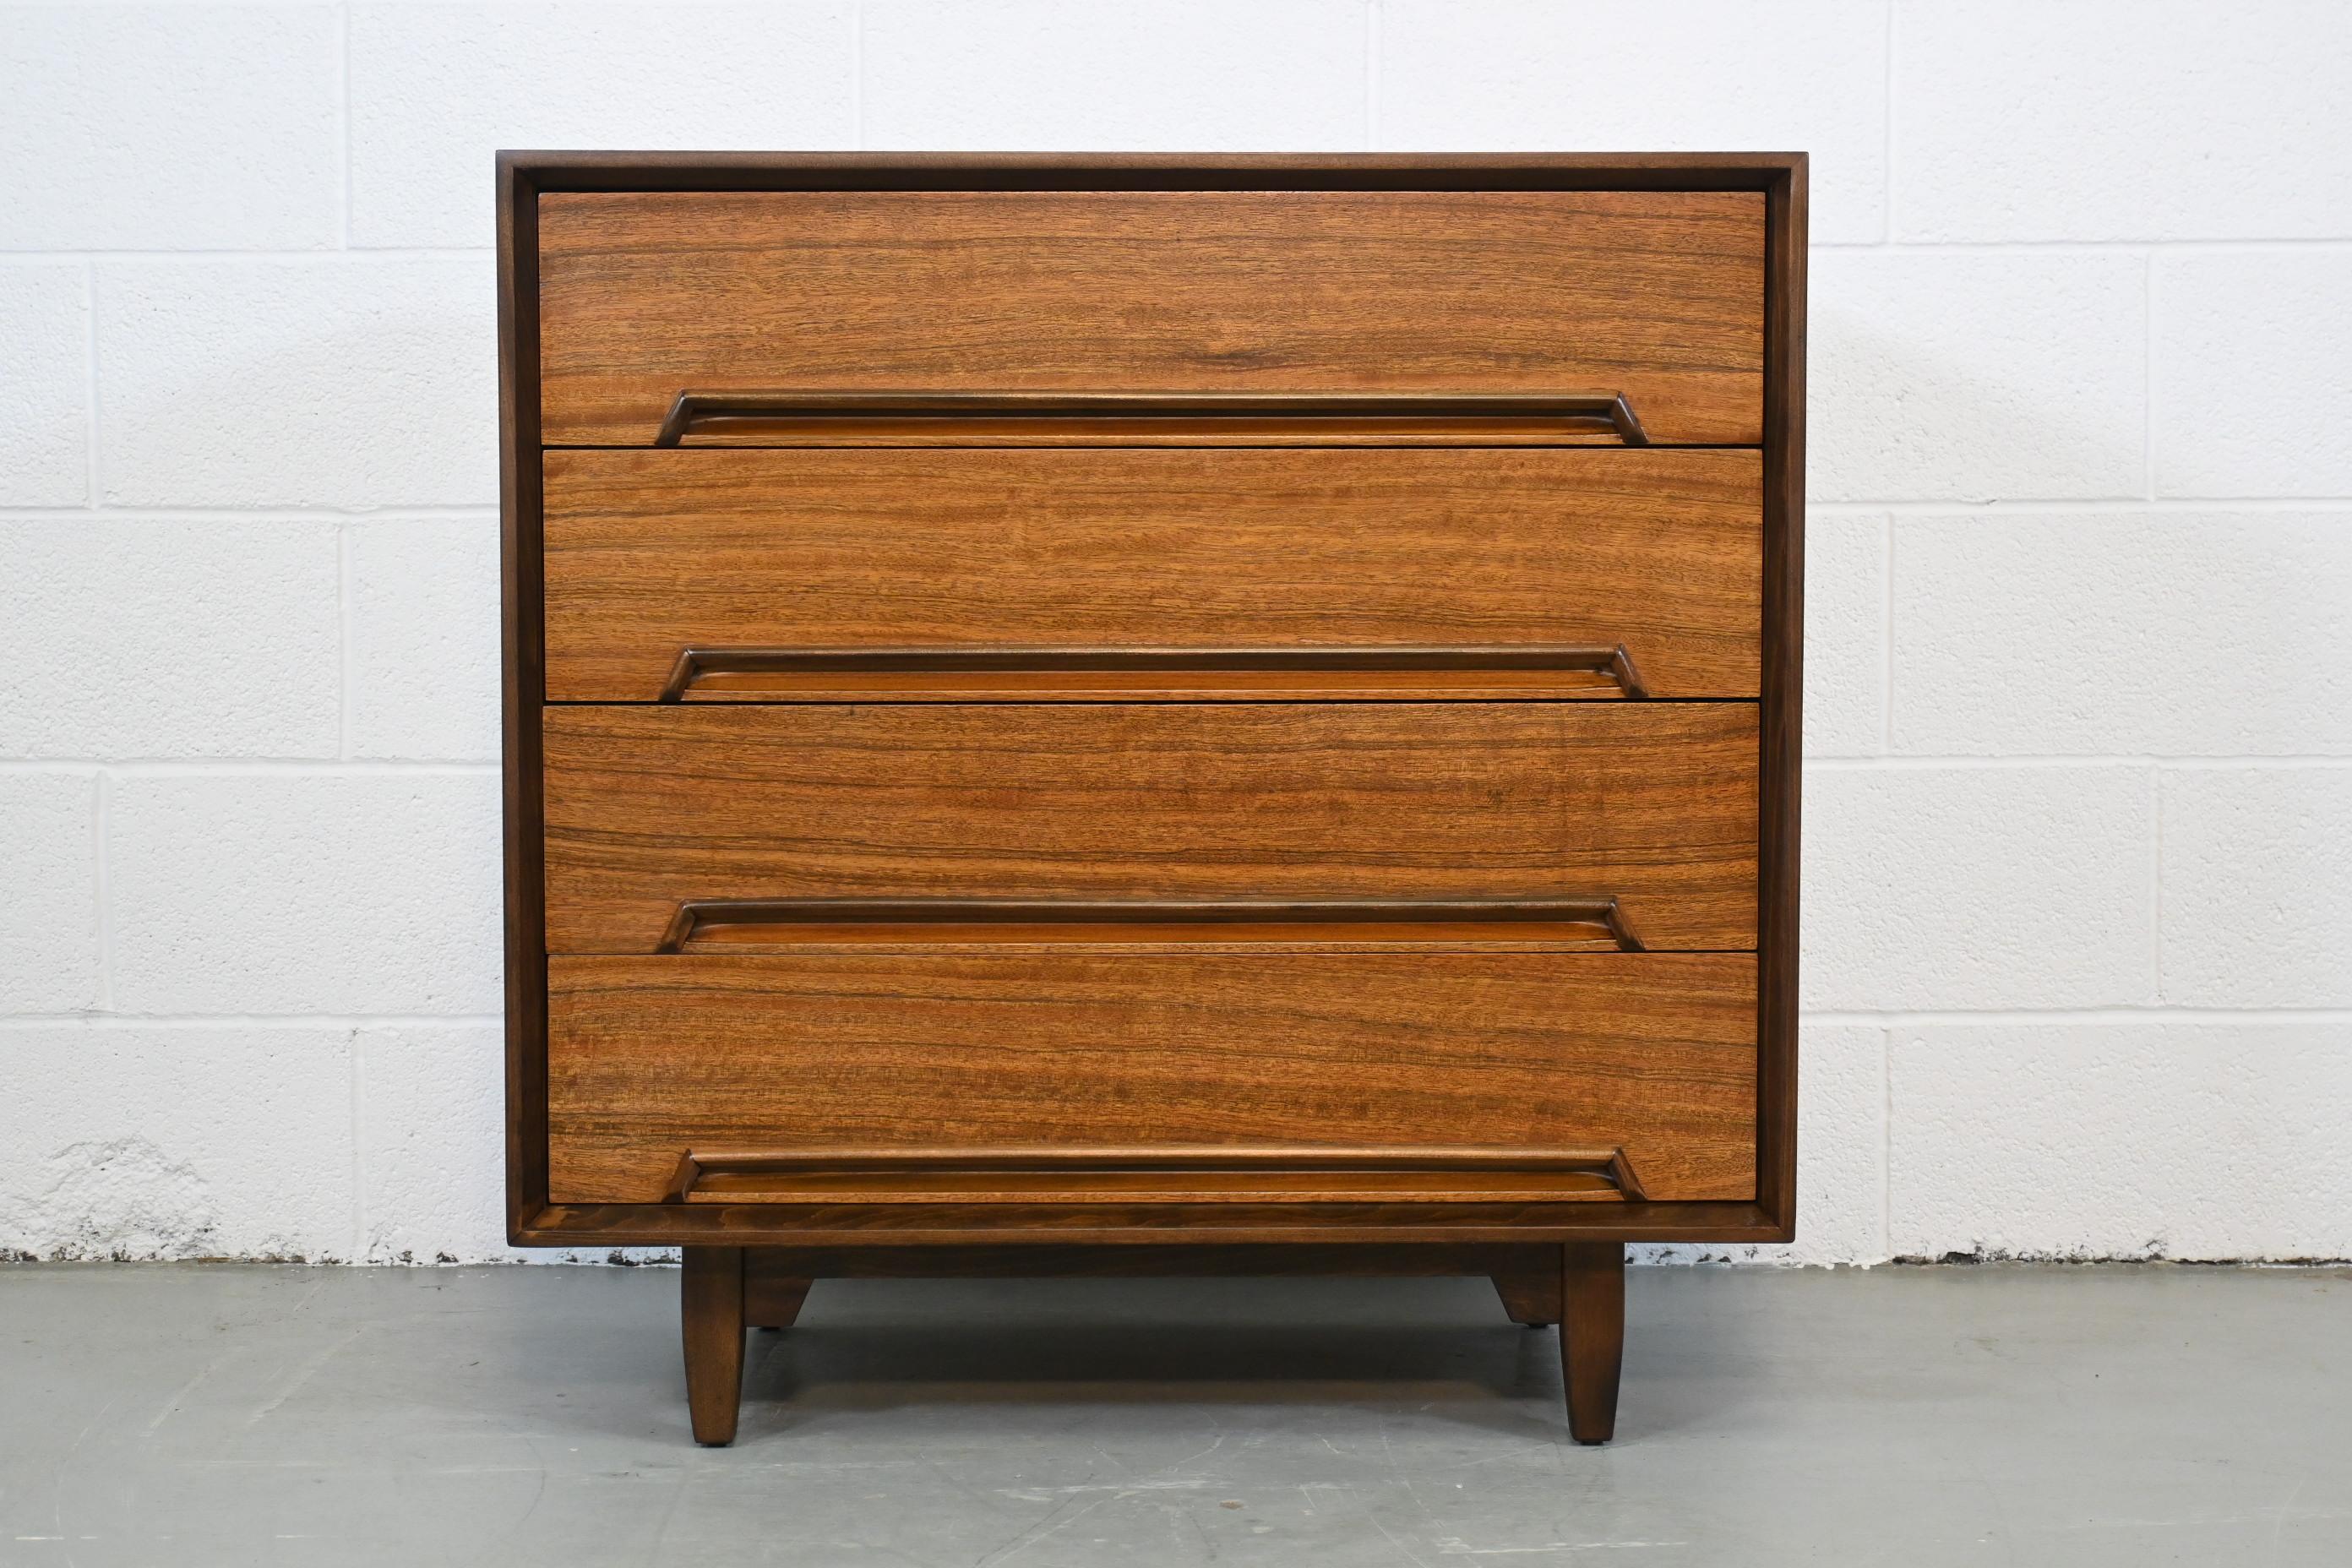 Milo Baughman for Drexel Perspective Mid-Century Modern chest of drawers or dresser

Drexel, USA, 1950s

32 Wide x 19 Deep x 32.63 High.

Mid-Century Modern Mindoro wood chest of four drawers. Could be used as a large